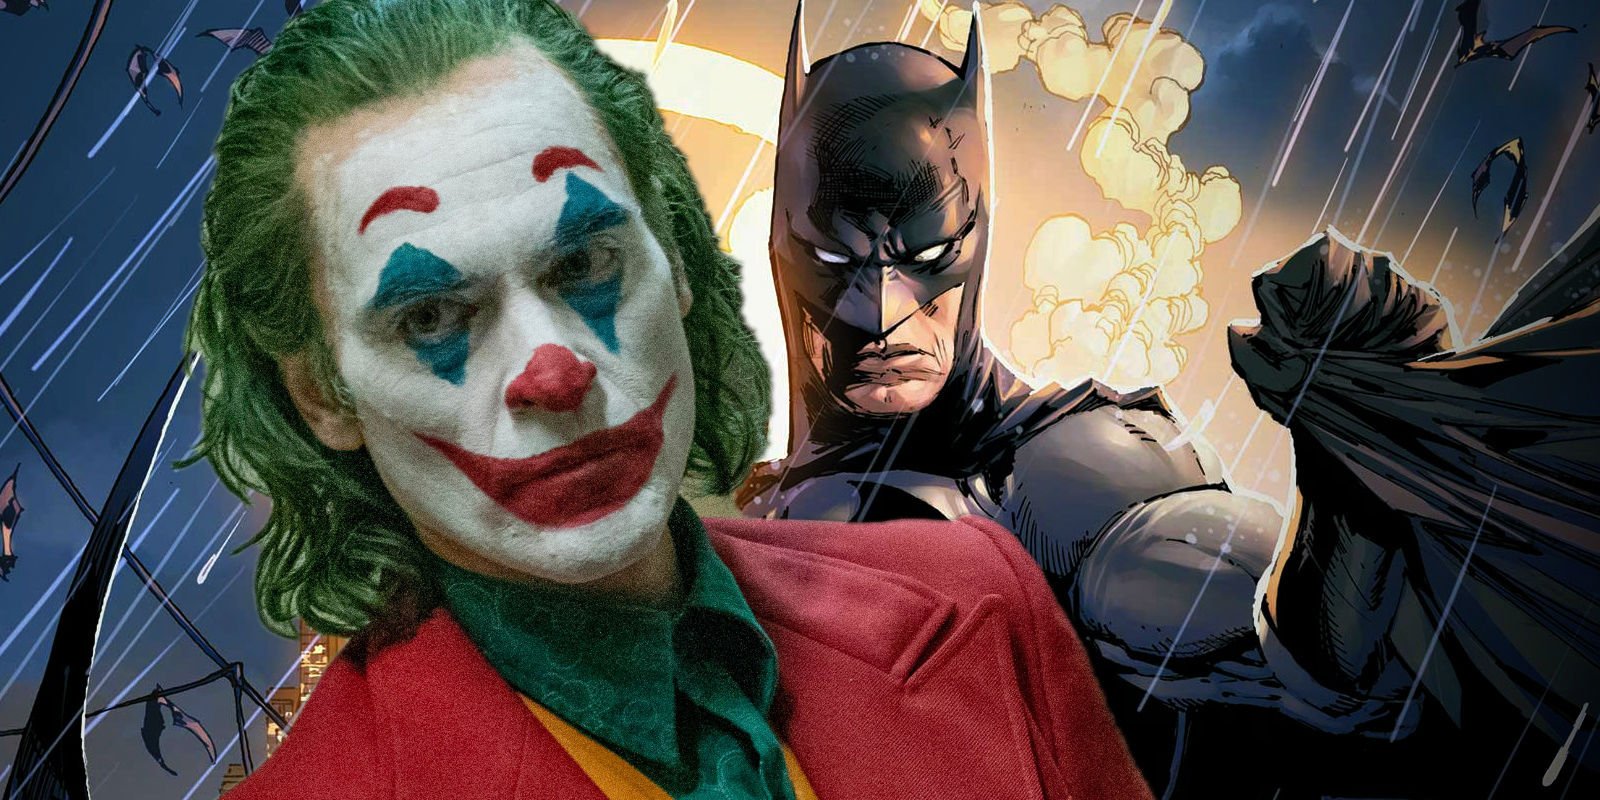 Joker Director Todd Phillips Wants To See A Batman Movie In The Same Universe